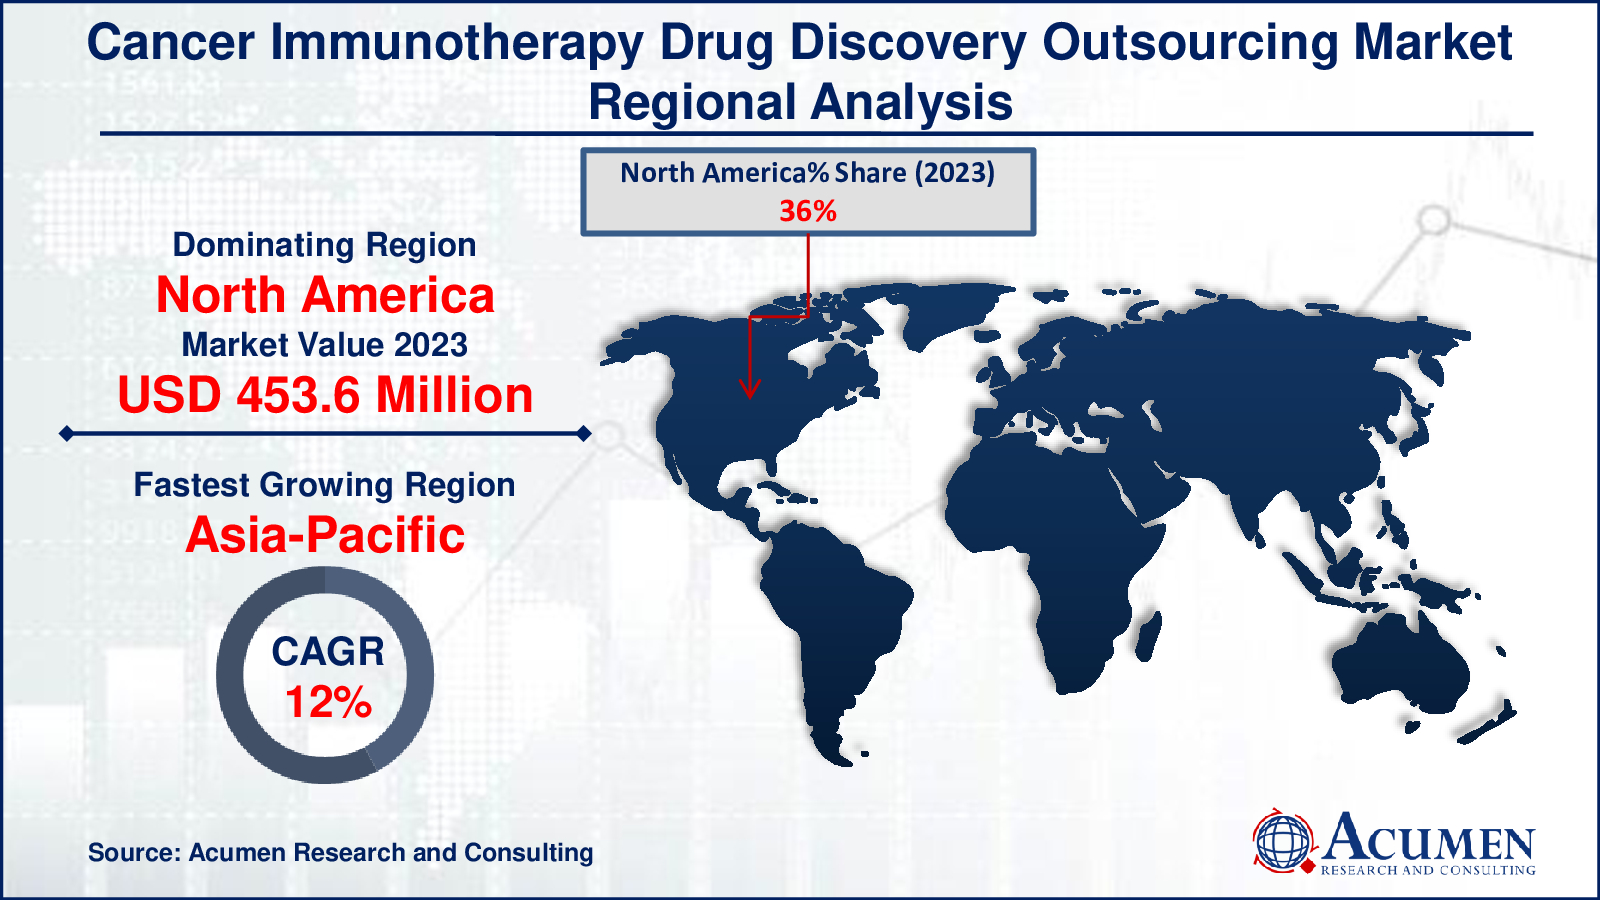 Cancer Immunotherapy Drug Discovery Outsourcing Market Drivers